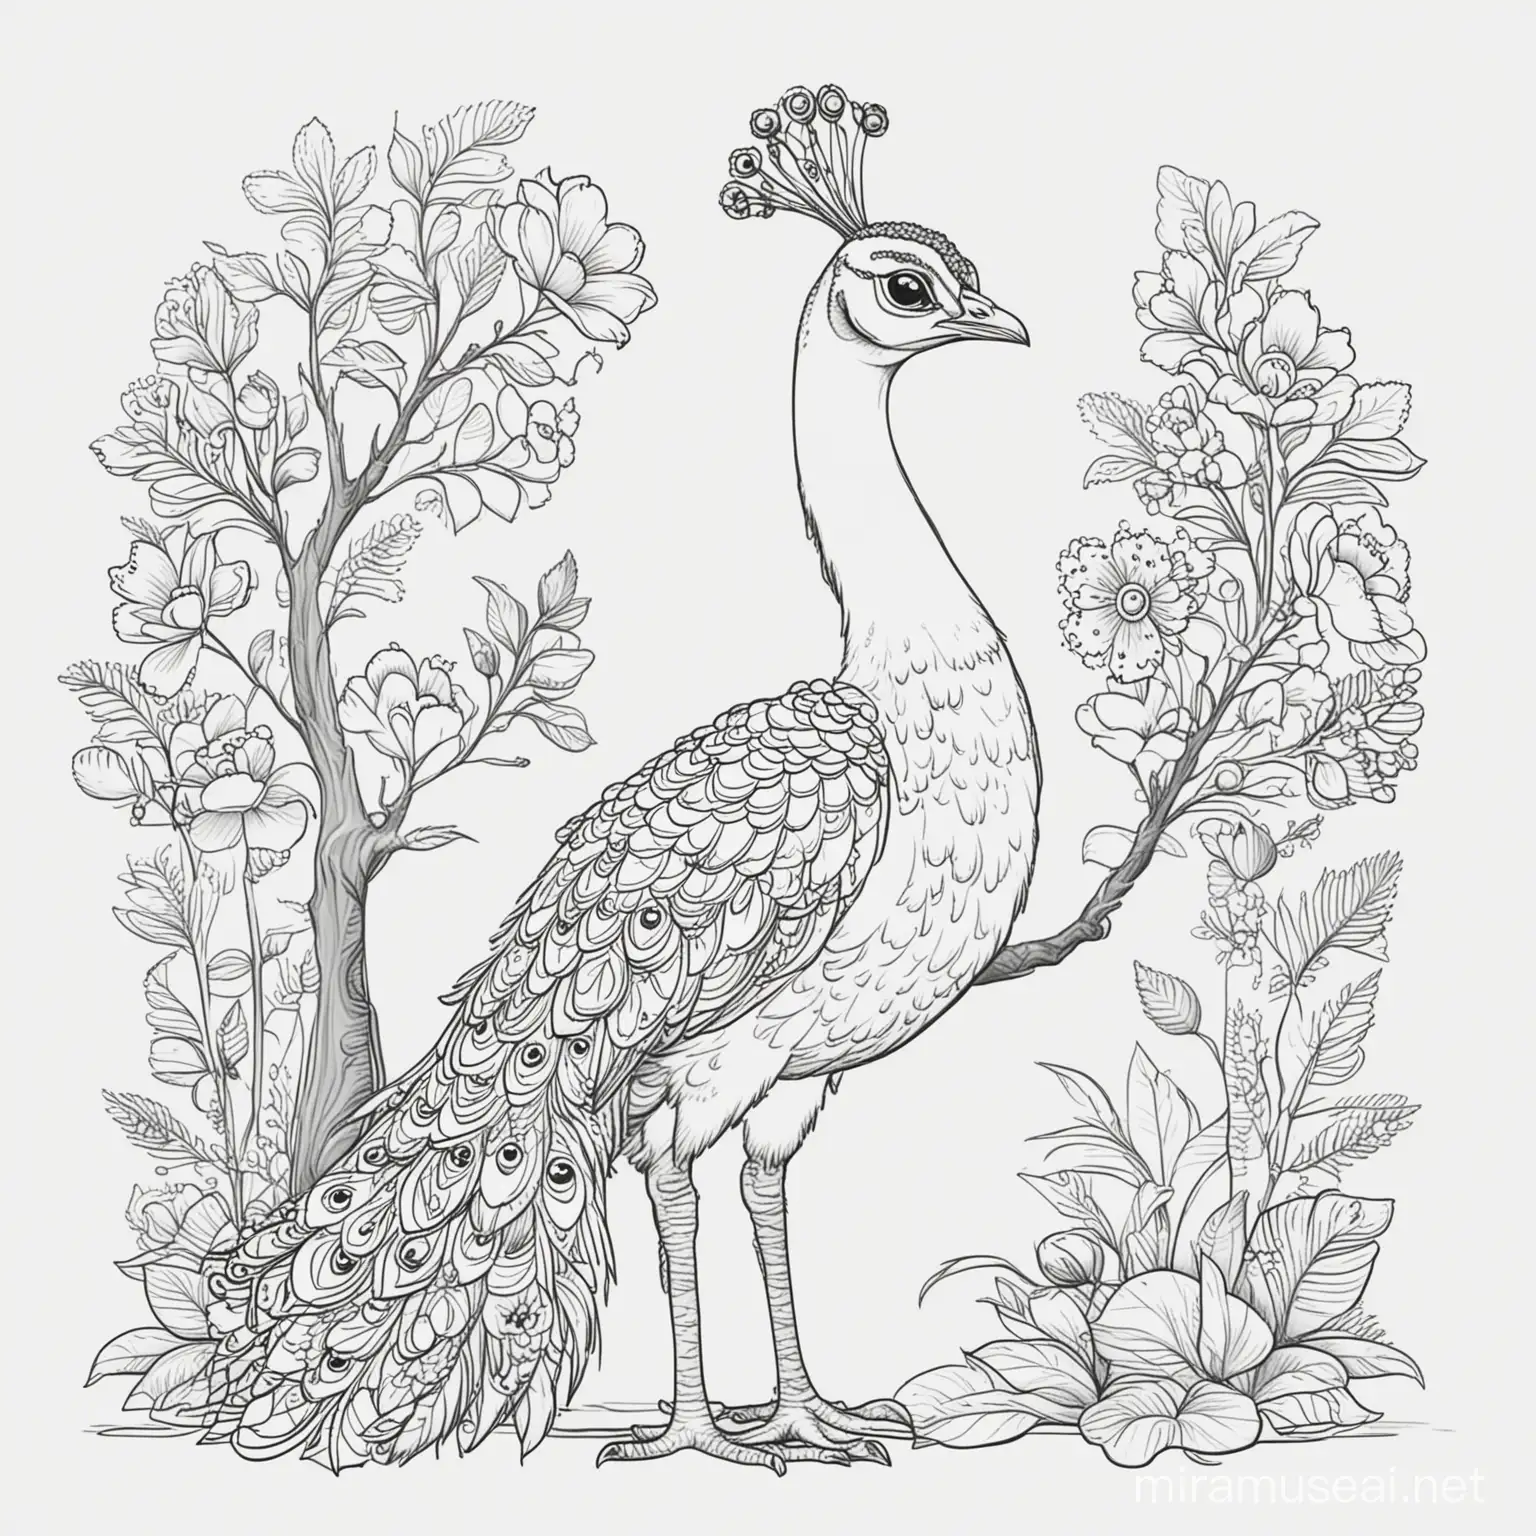 Cartoon Peacock Coloring Page with Flowers and Tree